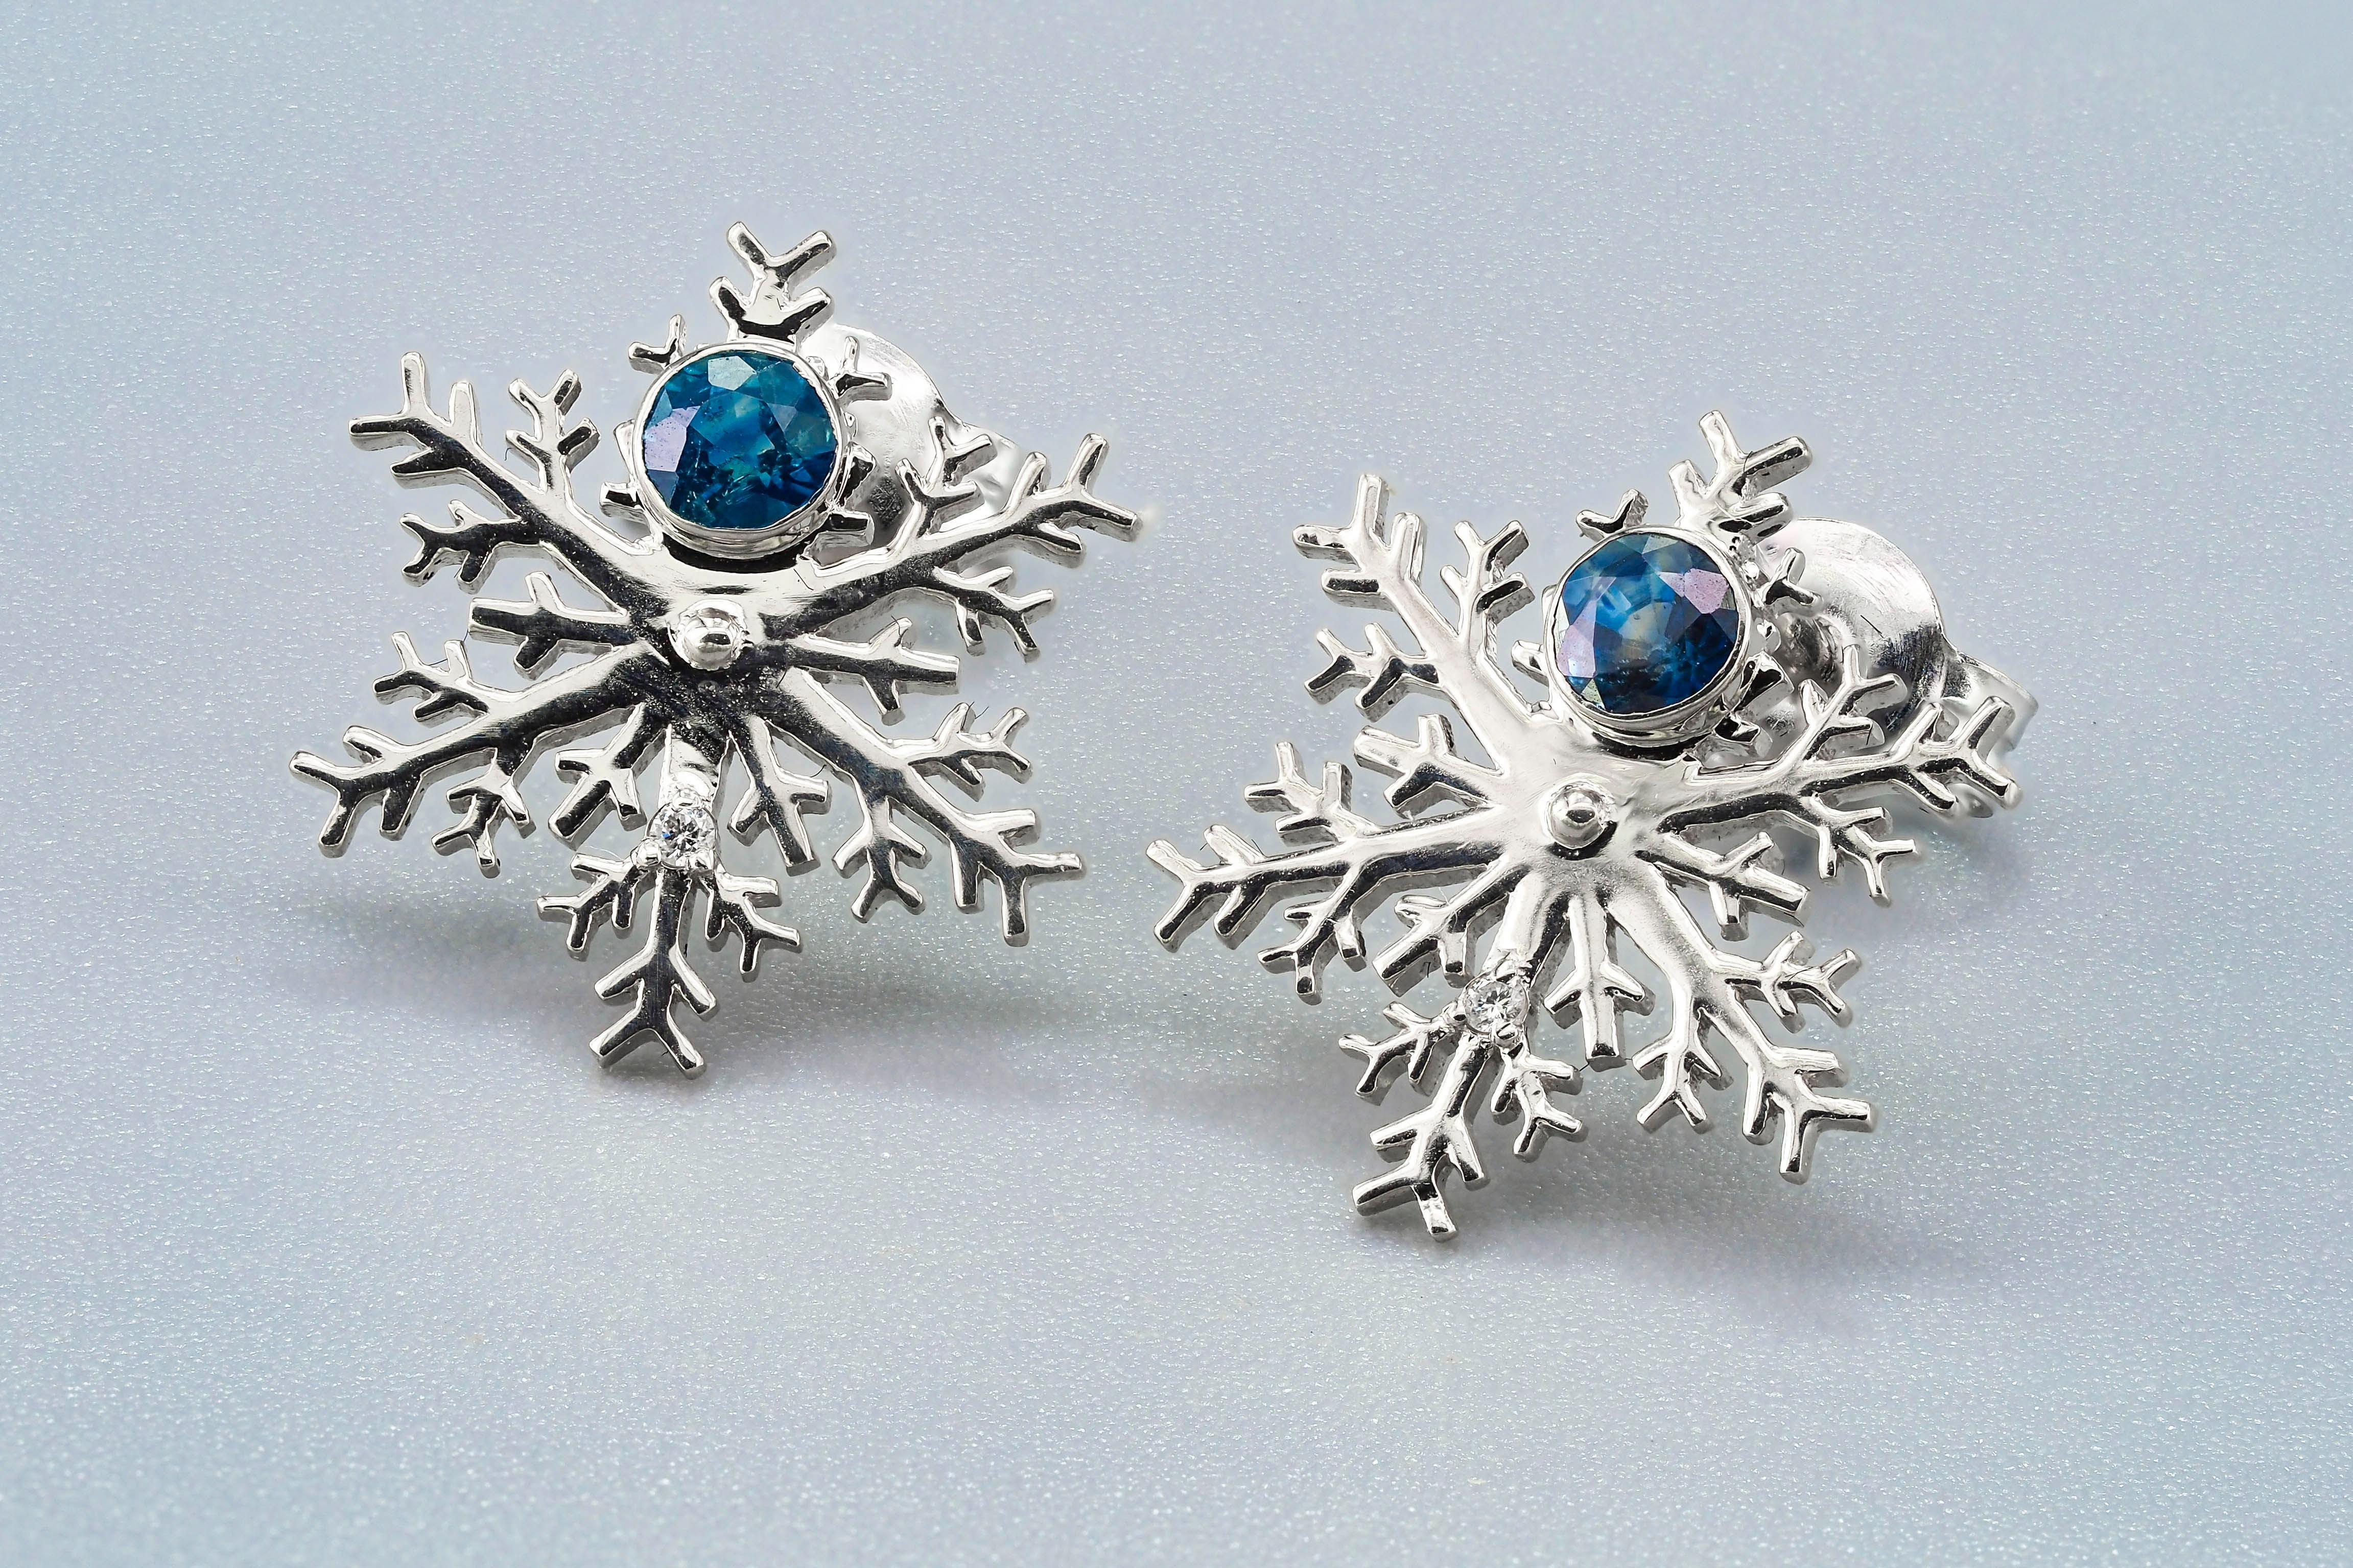 14kt solid gold snowflake earrings with natural sapphires and diamonds. September birthstone.
Weight: 1.85 g.
Size: 14.2 x 12.9 mm.

Central stones: Natural sapphires
Weight: 0.35 ct total, 2 pieces, round cut
Clarity: Transparent with inclusions,